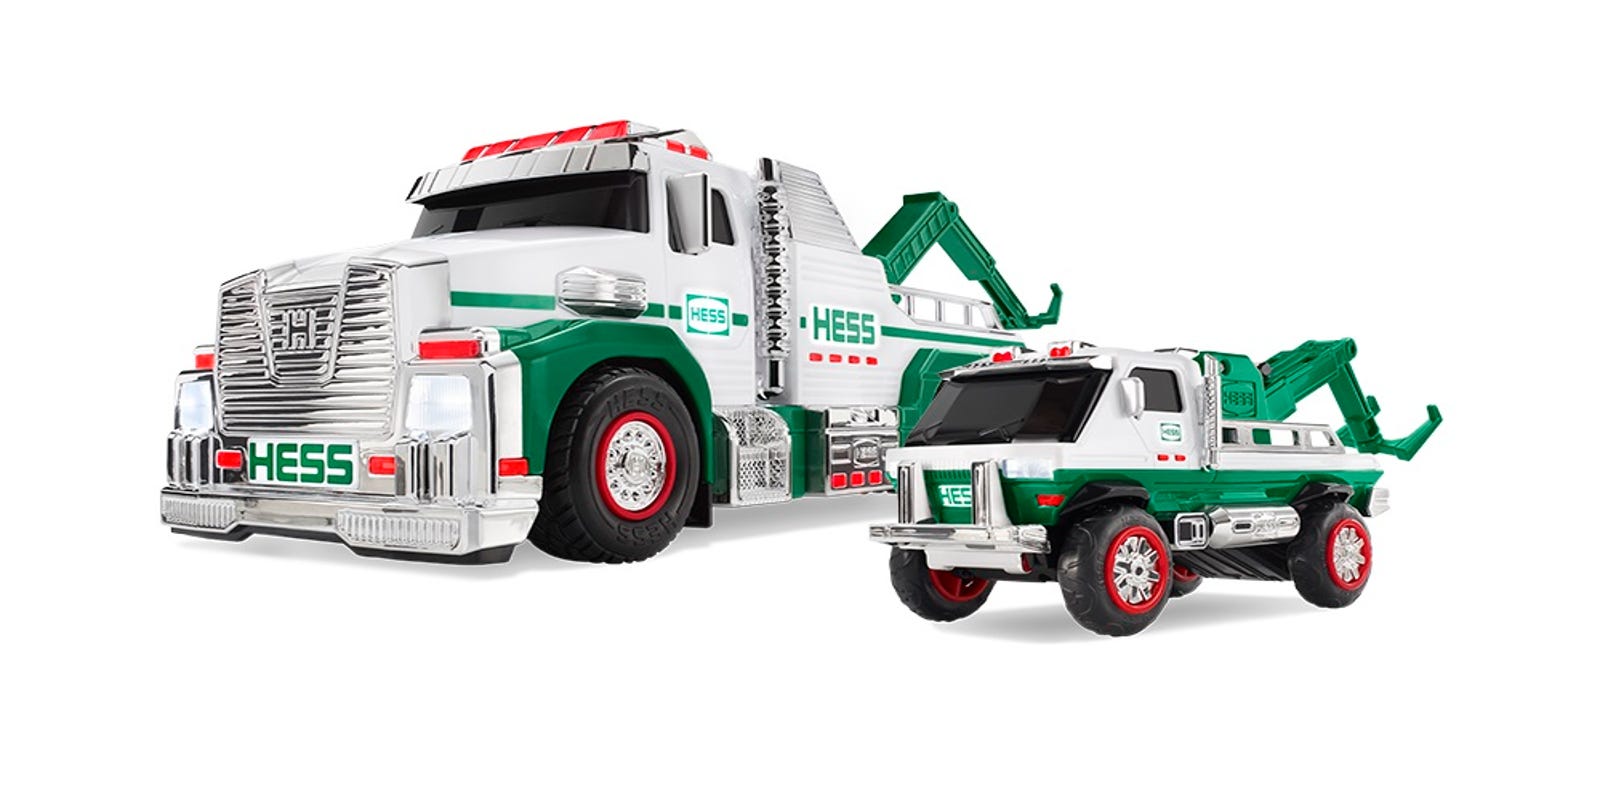 Meet the new Hess truck 2019 Holiday Hess truck on sale now